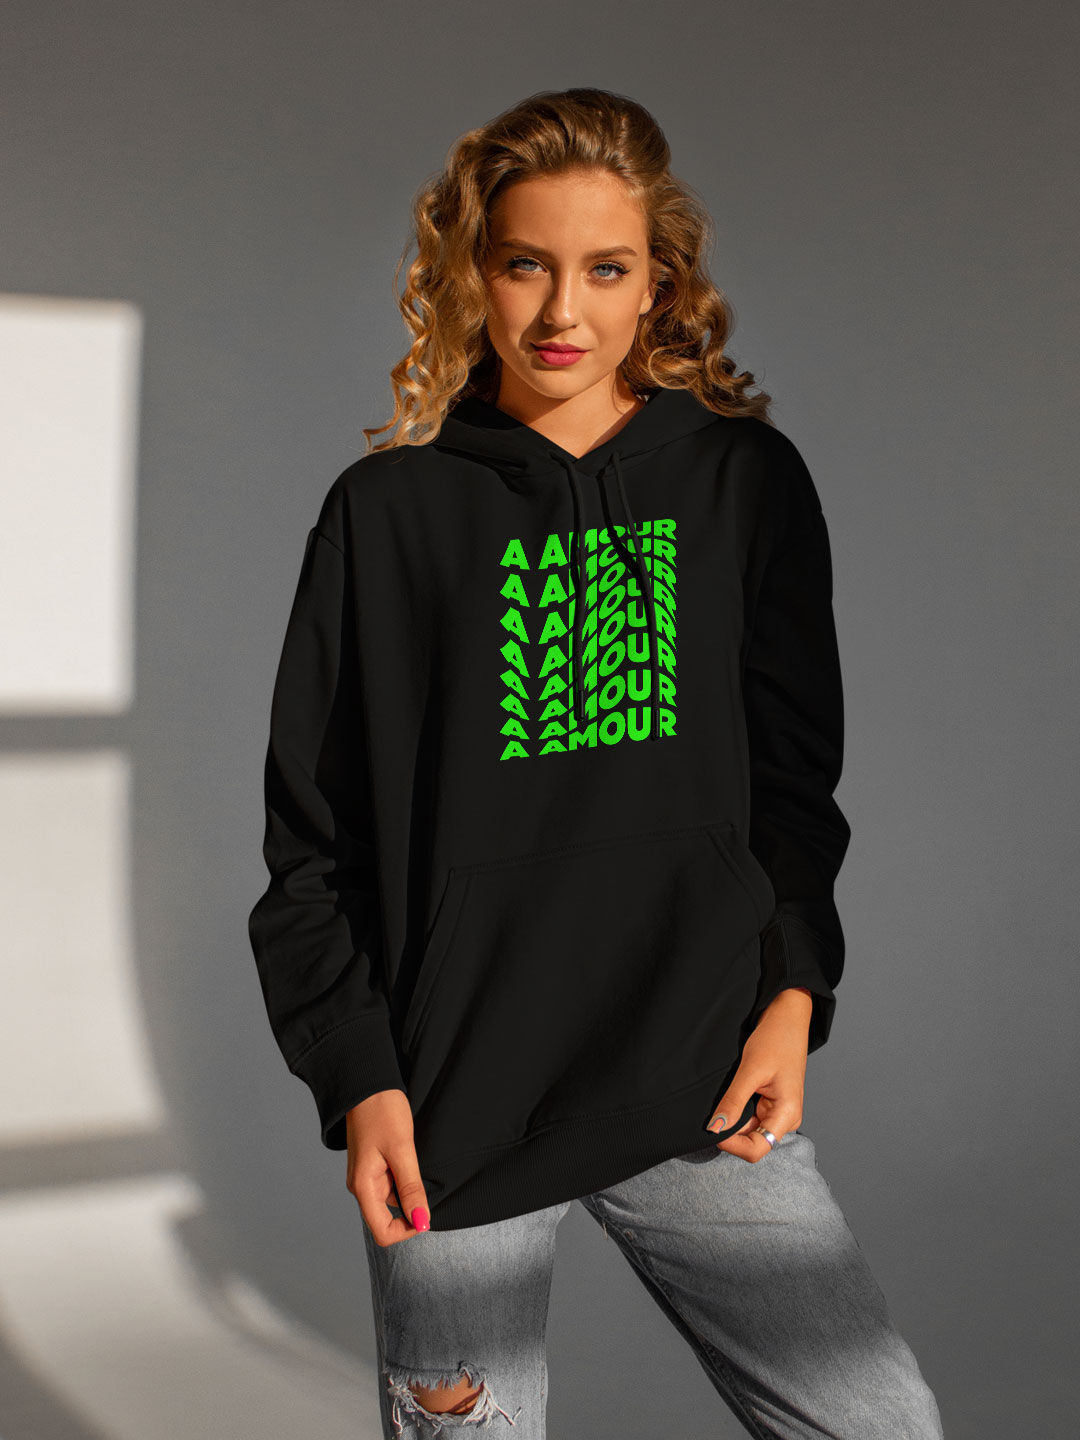 A Amour - Womens Hoodie Black